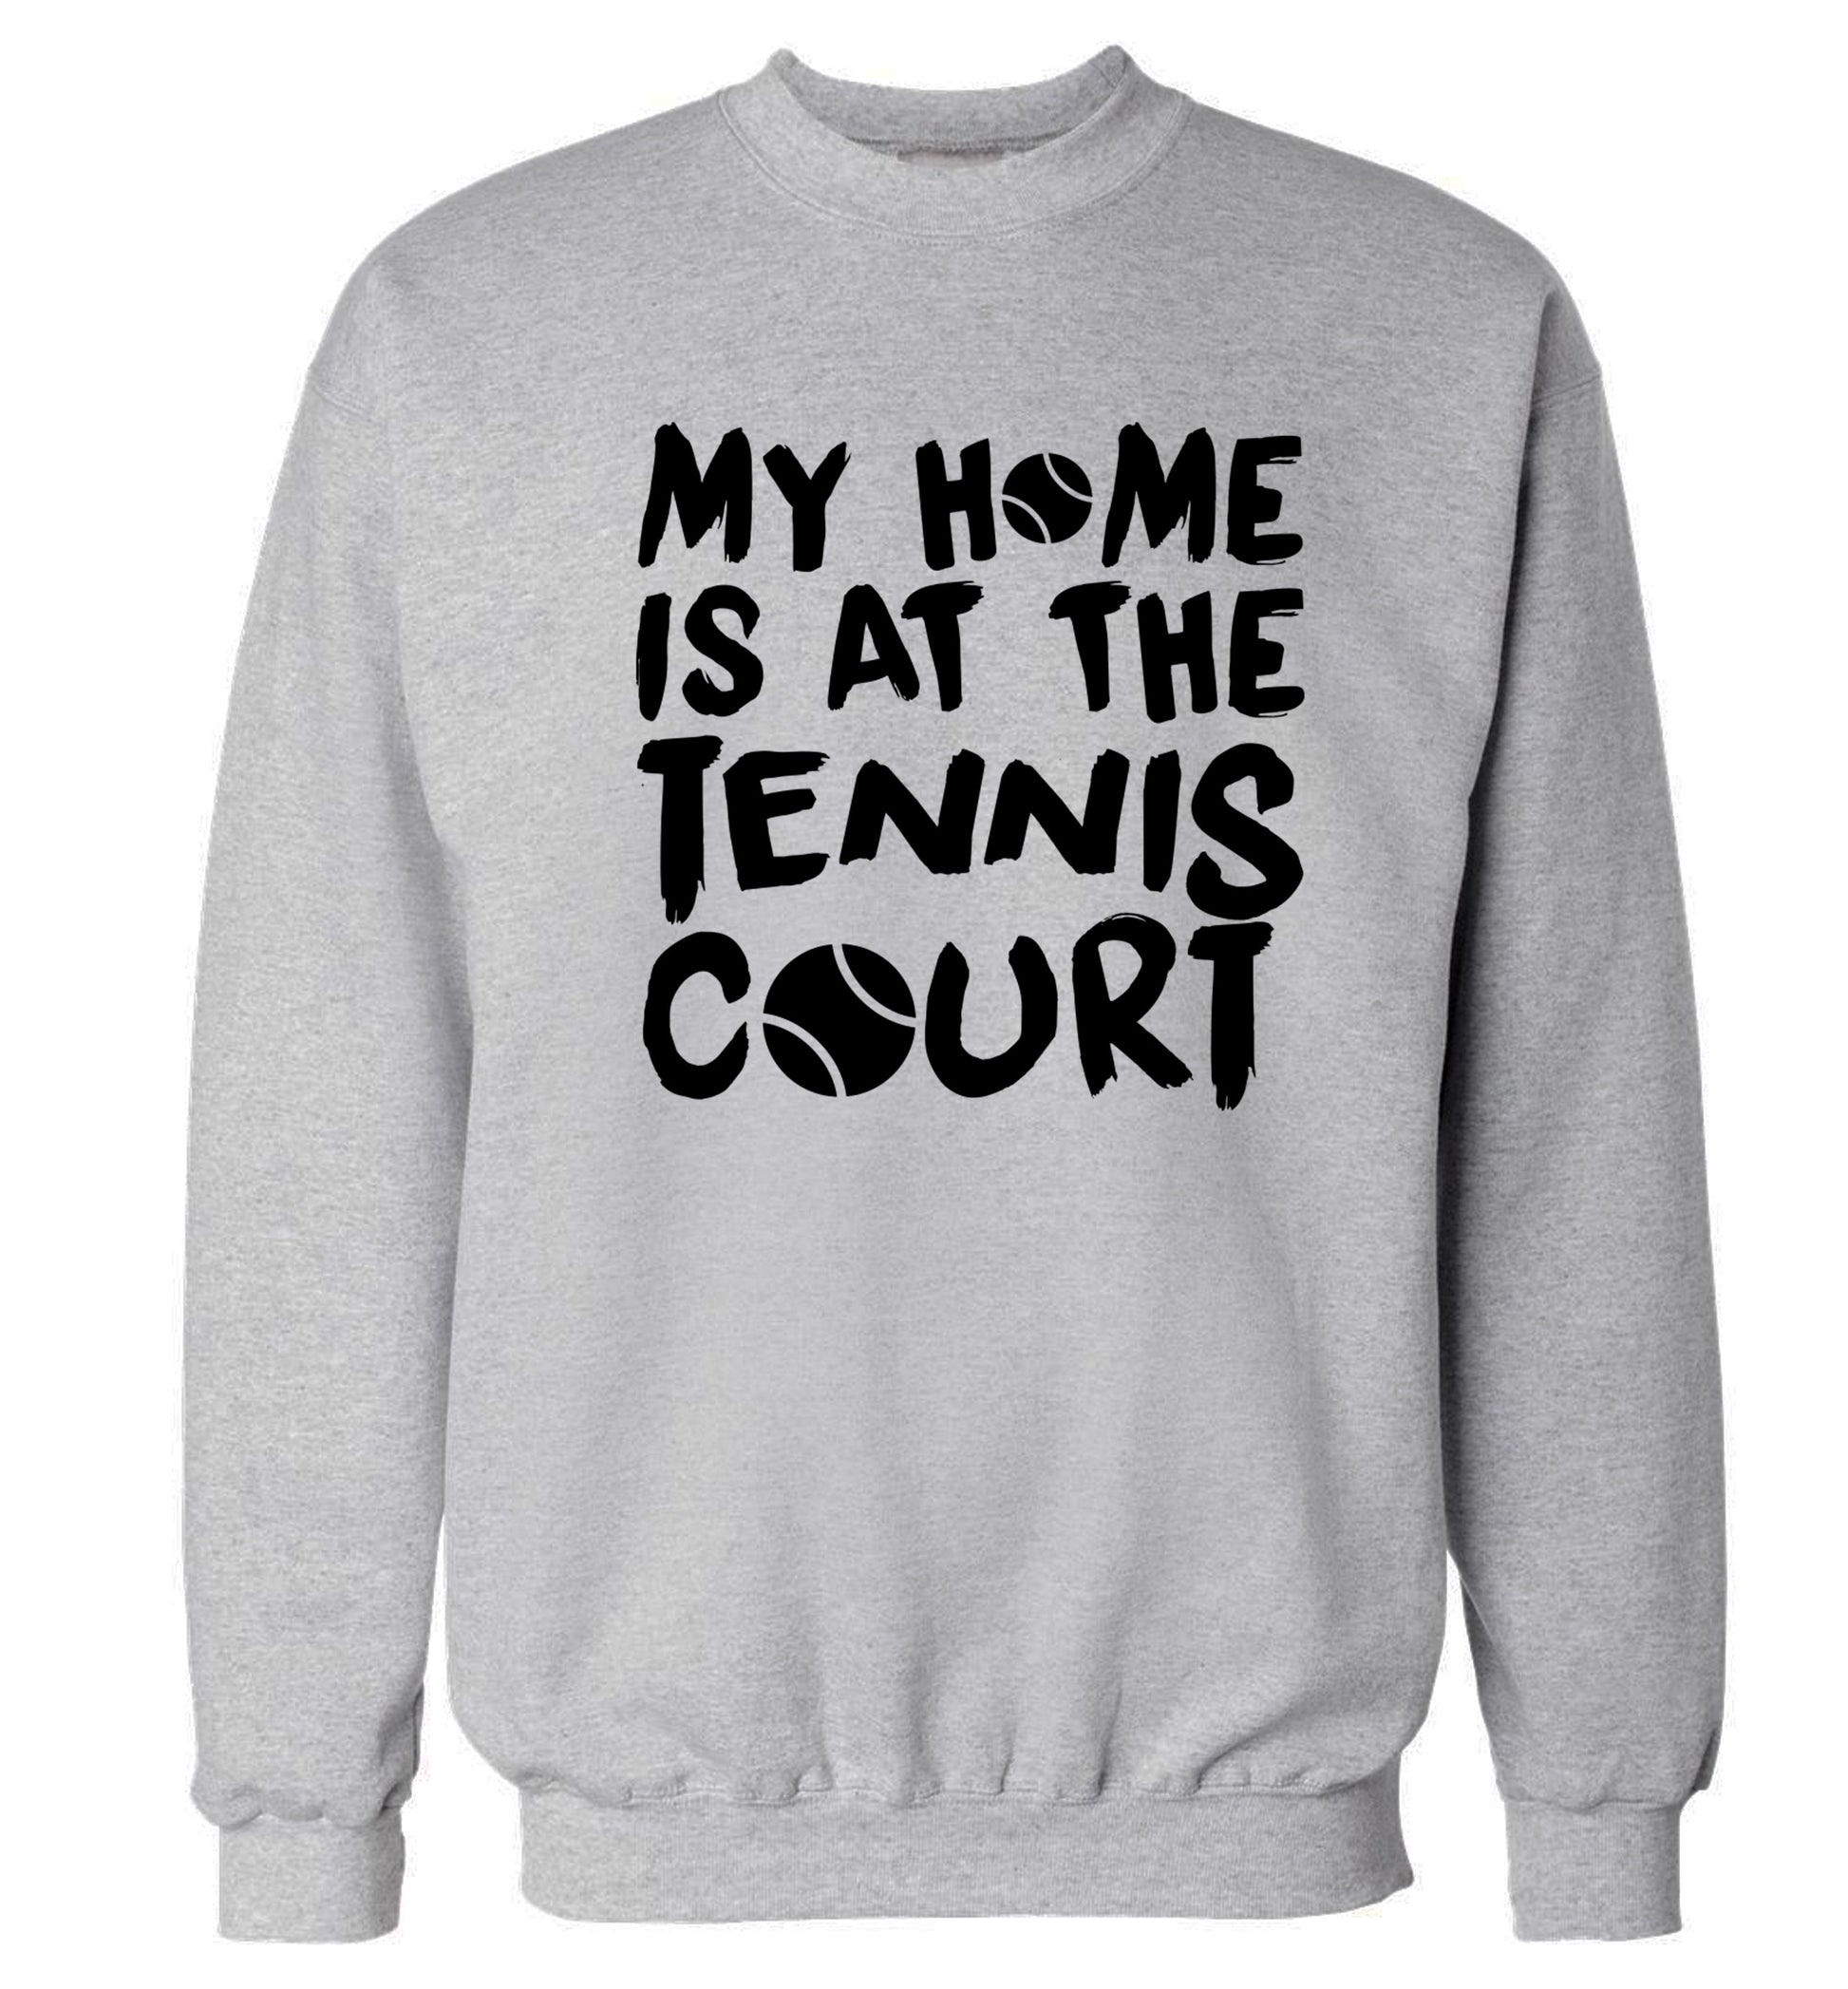 My home is at the tennis court Adult's unisex grey Sweater 2XL